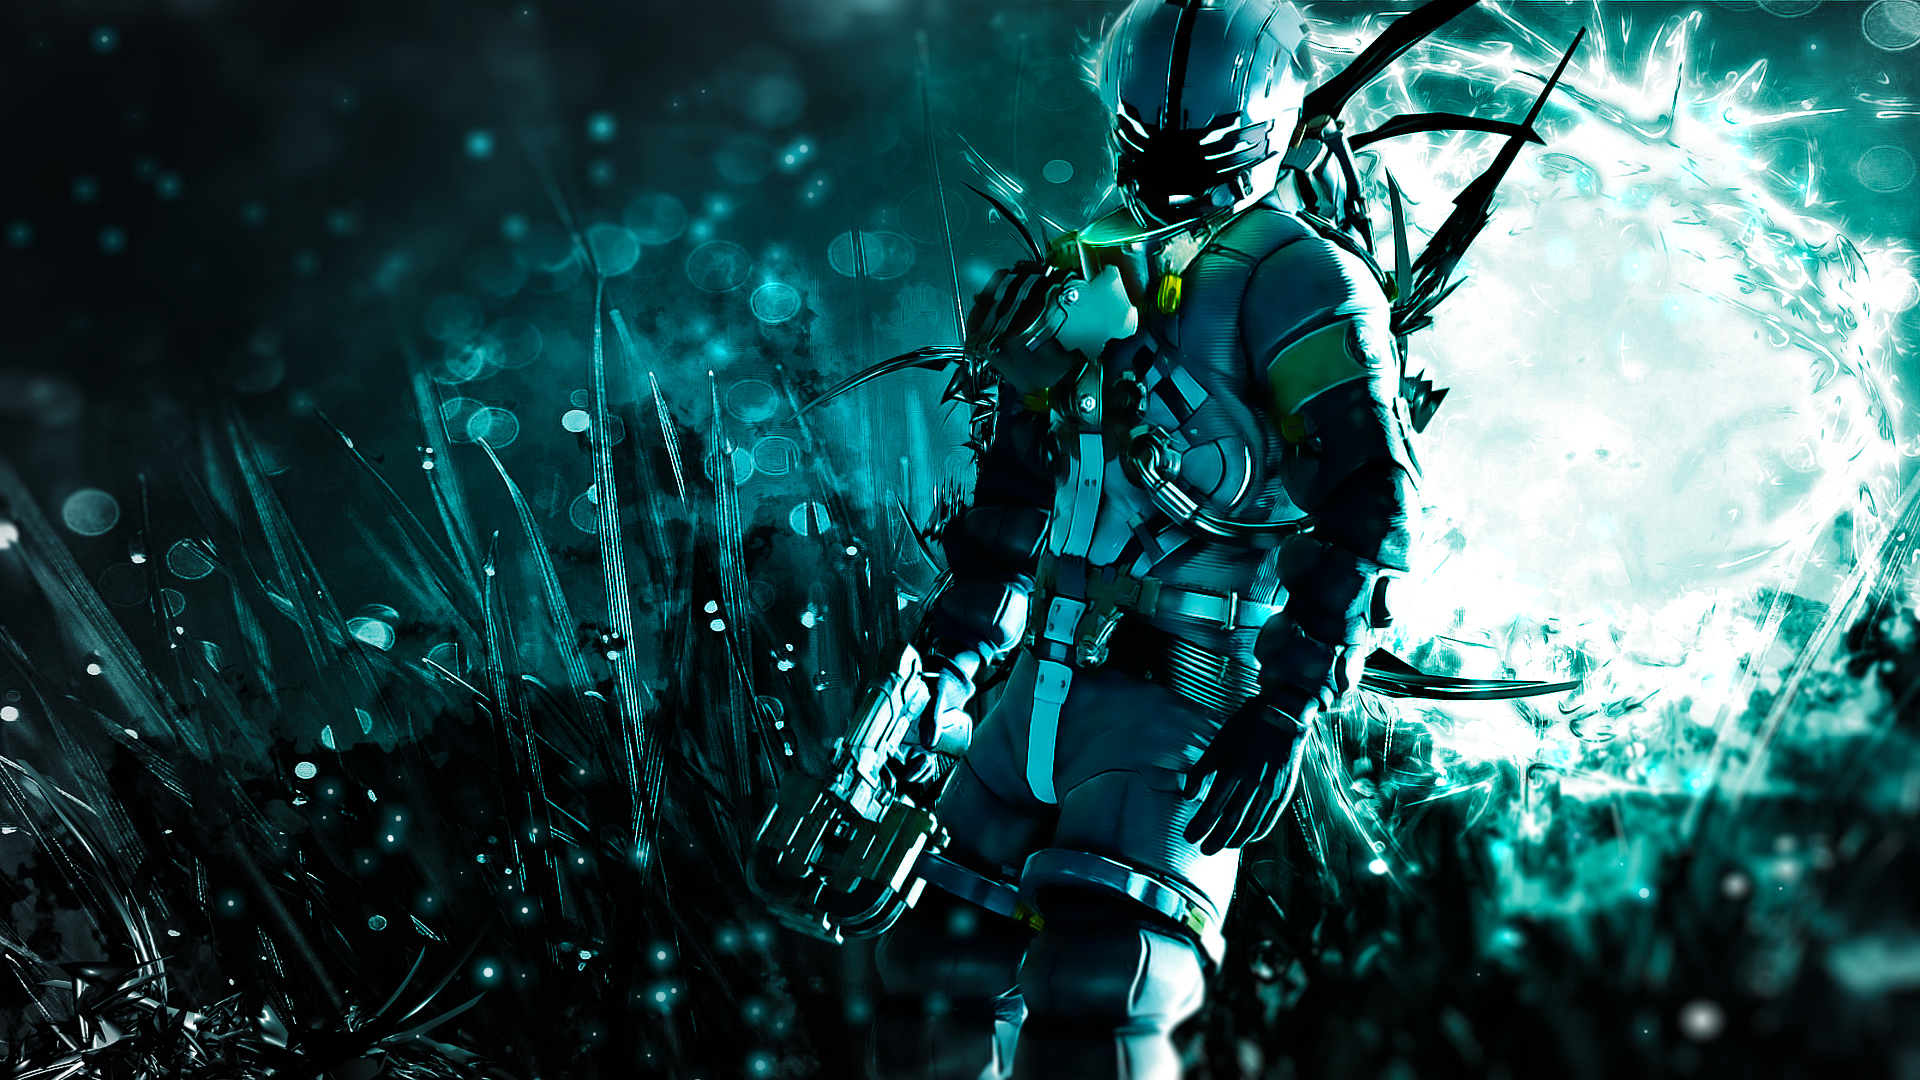 Dead Space Nice And HD Wallpaper Music Games Etc